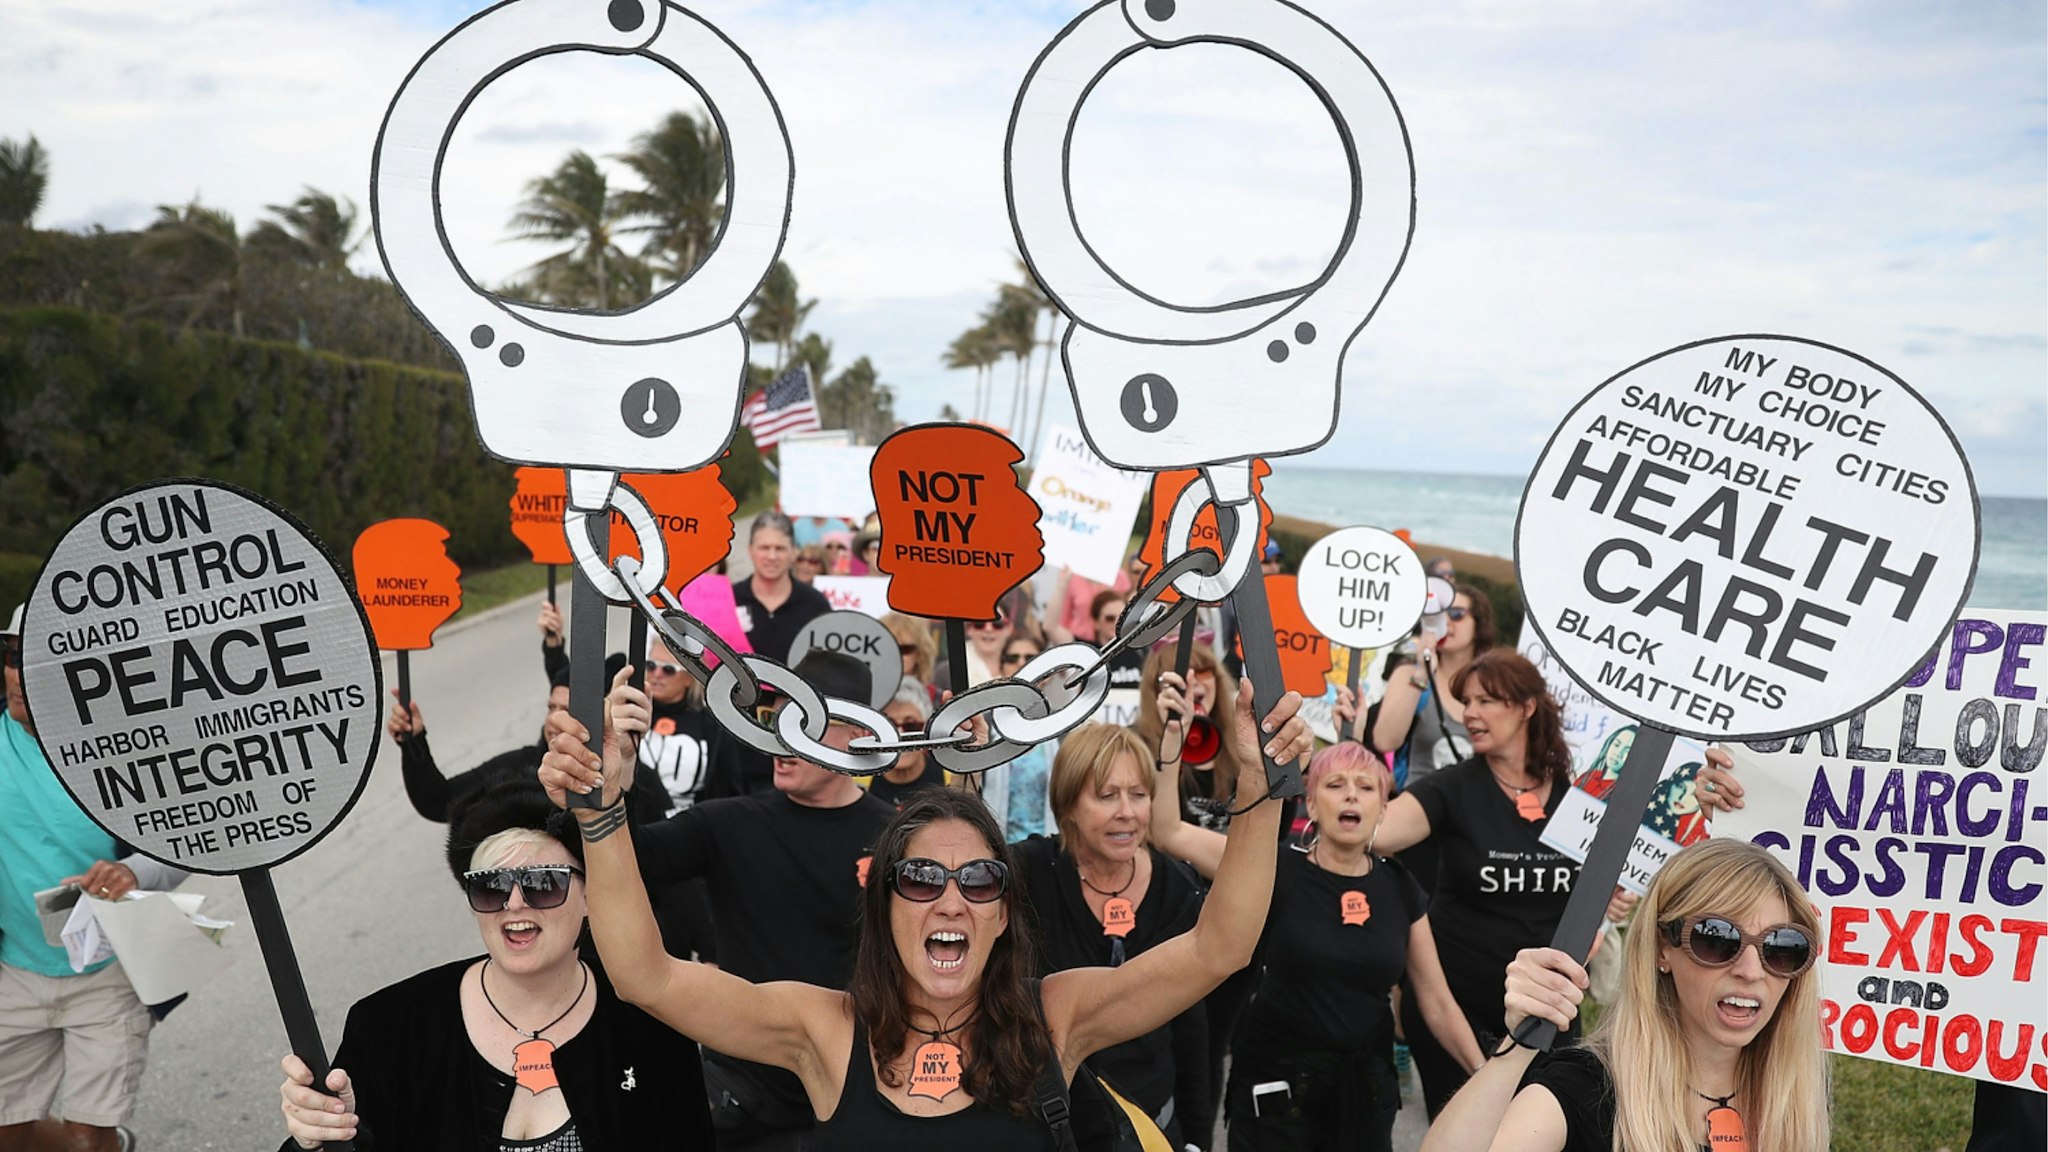 Alessandra Mondolfi (C) and other people protest against President Donald Trump on the one year anniversary of his inauguration on January 20, 2018 in Palm Beach, Florida.